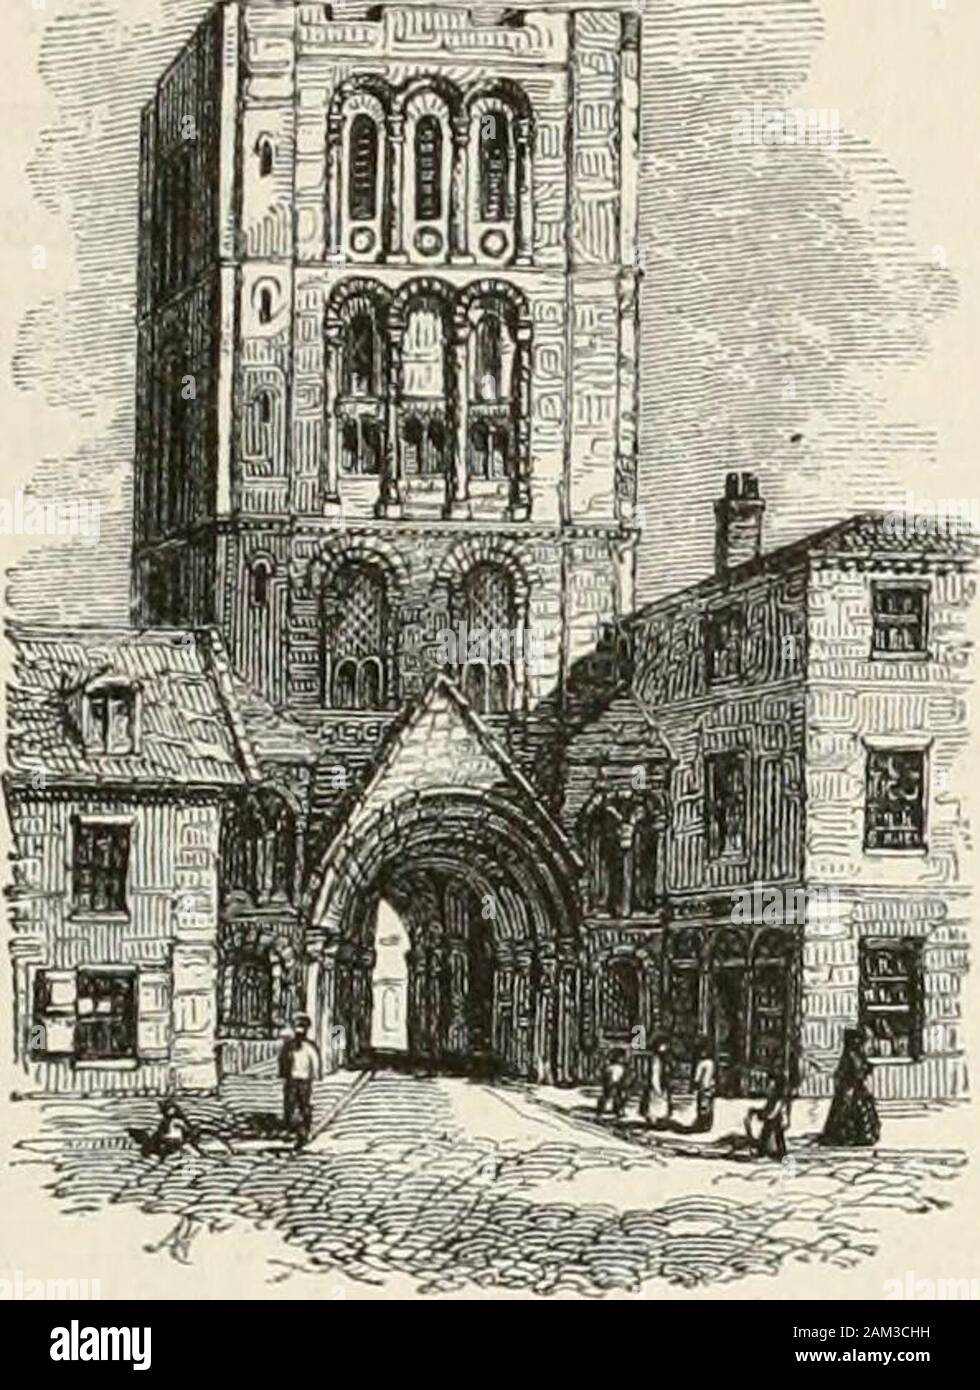 The Herald and genealogist . NORMAN TOWER AT BURY. THE BRIGHTS OF SUFFOLK. The Brights of Suffolk, England ; Represented in America by the Descendants ofHenry Bright, Jun., who came to New England in 1630, and settled in Water-town, Massachusetts. By J. B. Bright. For Private Distribution, Boston, 1858,8vo. pp. XX. 345. Among the many handsome genealogical works that have been pro-duced in New England, this may deservedly be placed in the foremostrank: whilst it has this peculiar characteristic, that it is wholly devotedto the histoiy of those members of an American family who either livedbefo Stock Photo